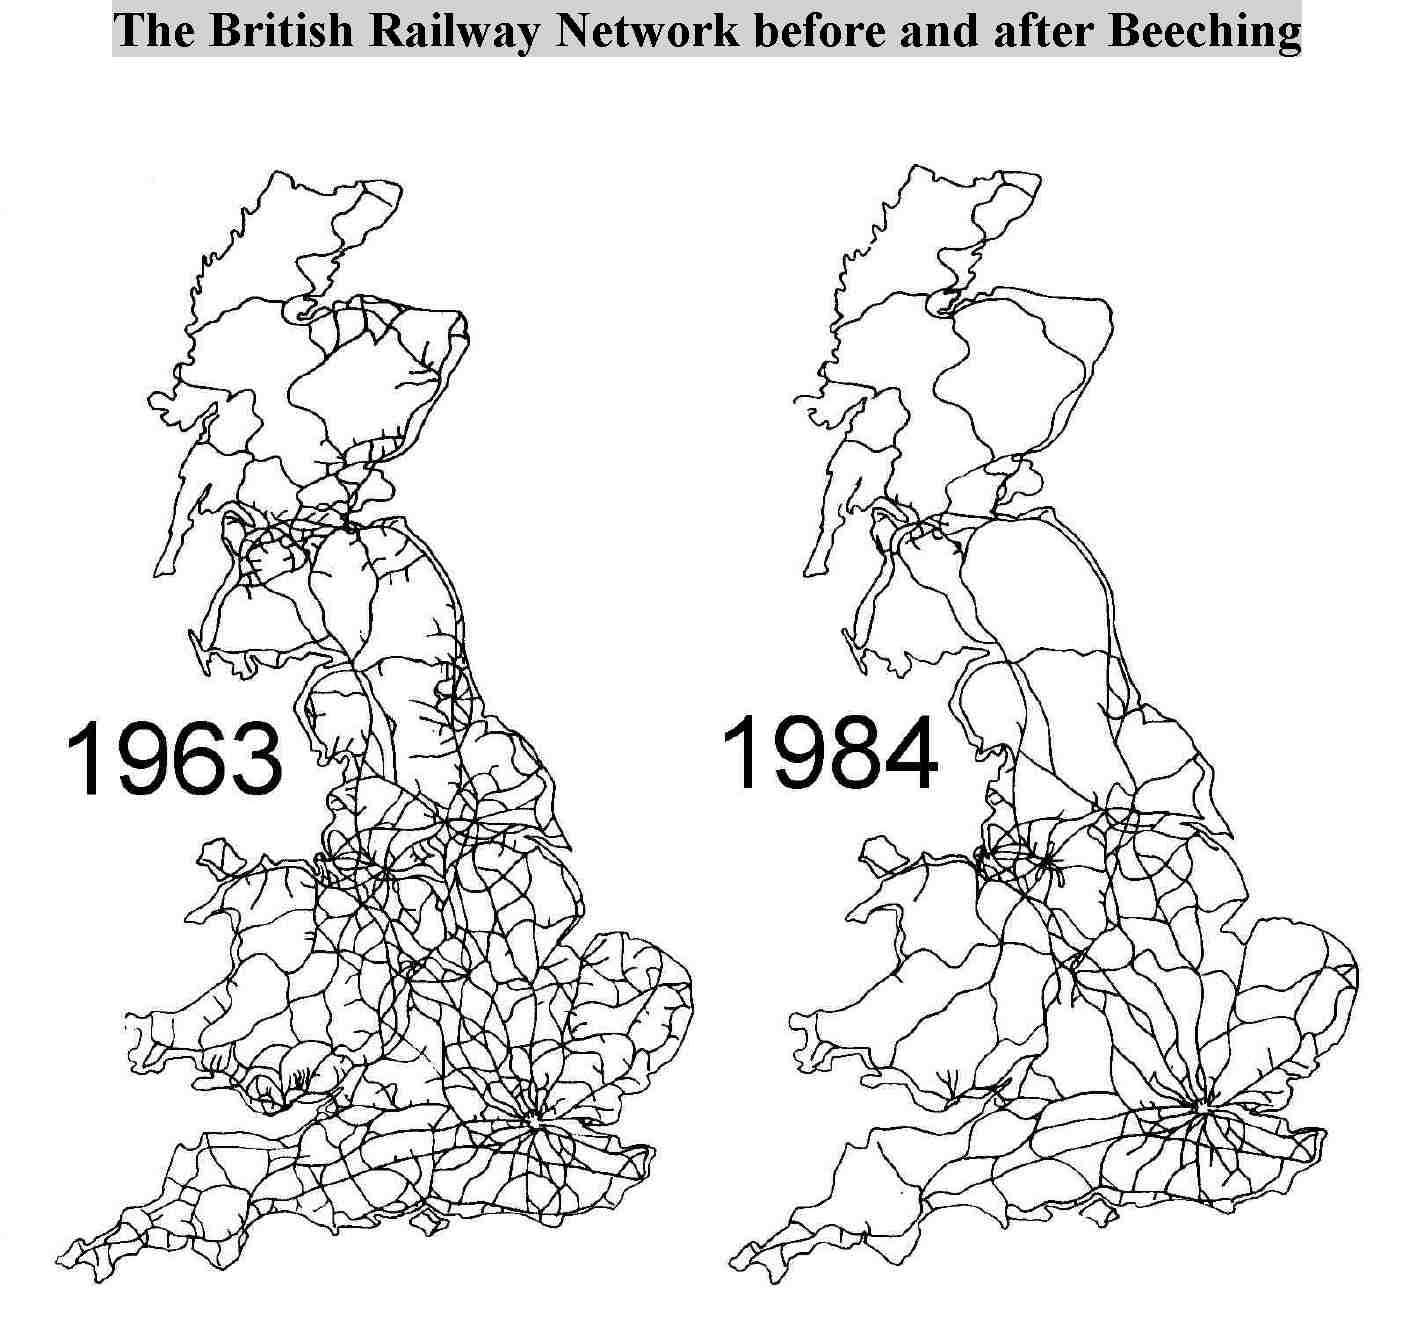 British railway network before and after Beeching